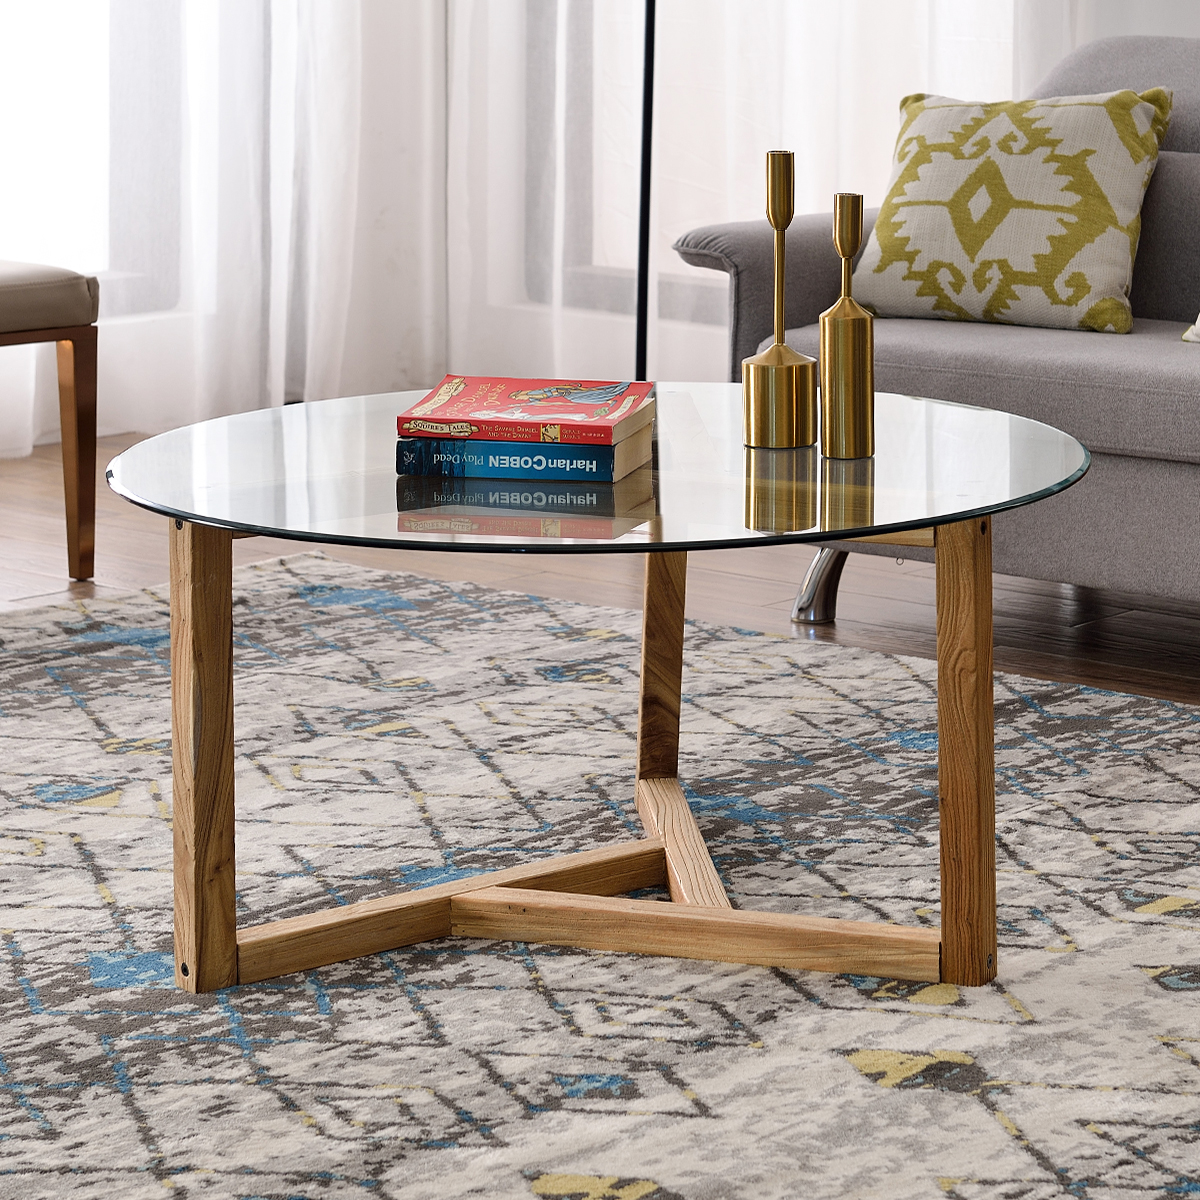 Glass Coffee Table, 35.4" Round Coffee Table with Sturdy Wood Base, Modern Cocktail Table with Tempered Glass Top, Round Center Table Sofa Table for Living Room, Easy Assembly, L2158 - image 2 of 7